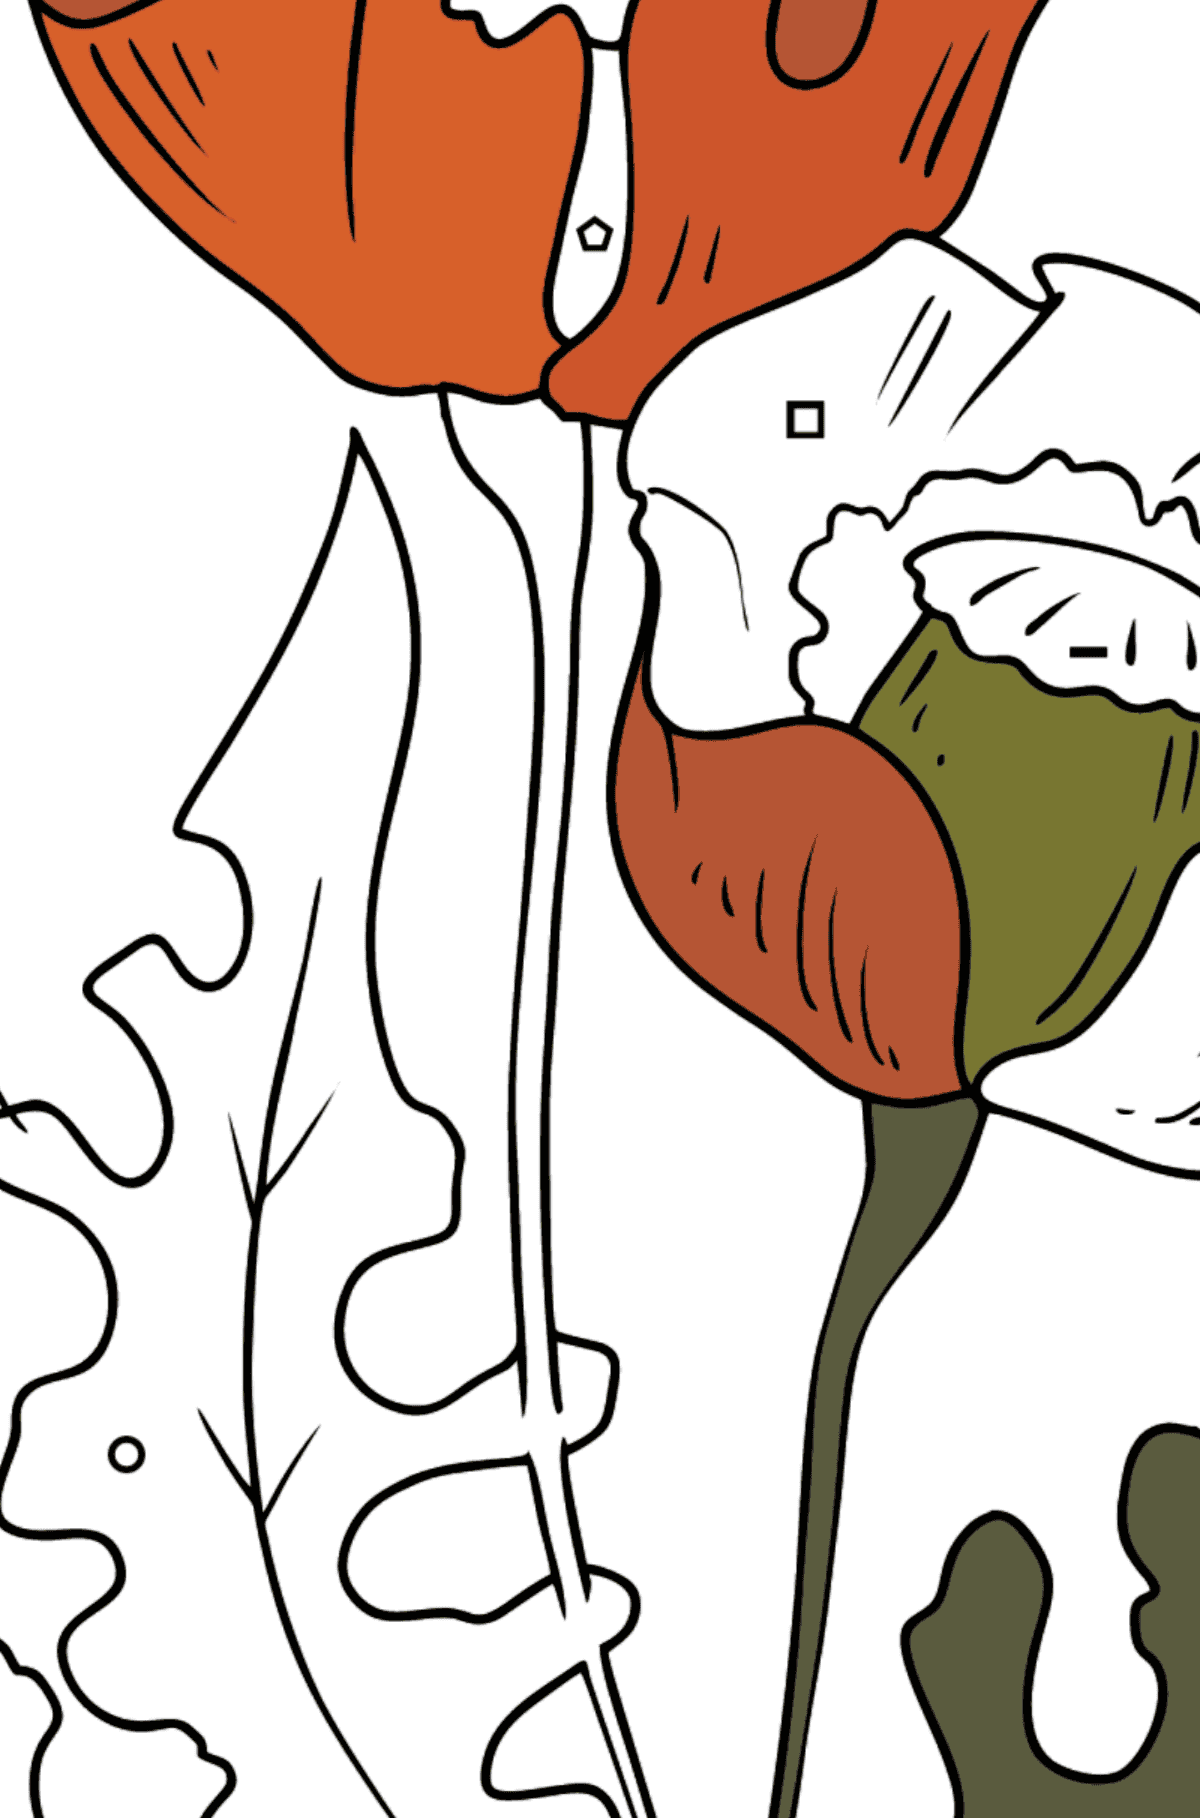 Flower Coloring Page - Beautiful Poppies - Coloring by Symbols and Geometric Shapes for Kids